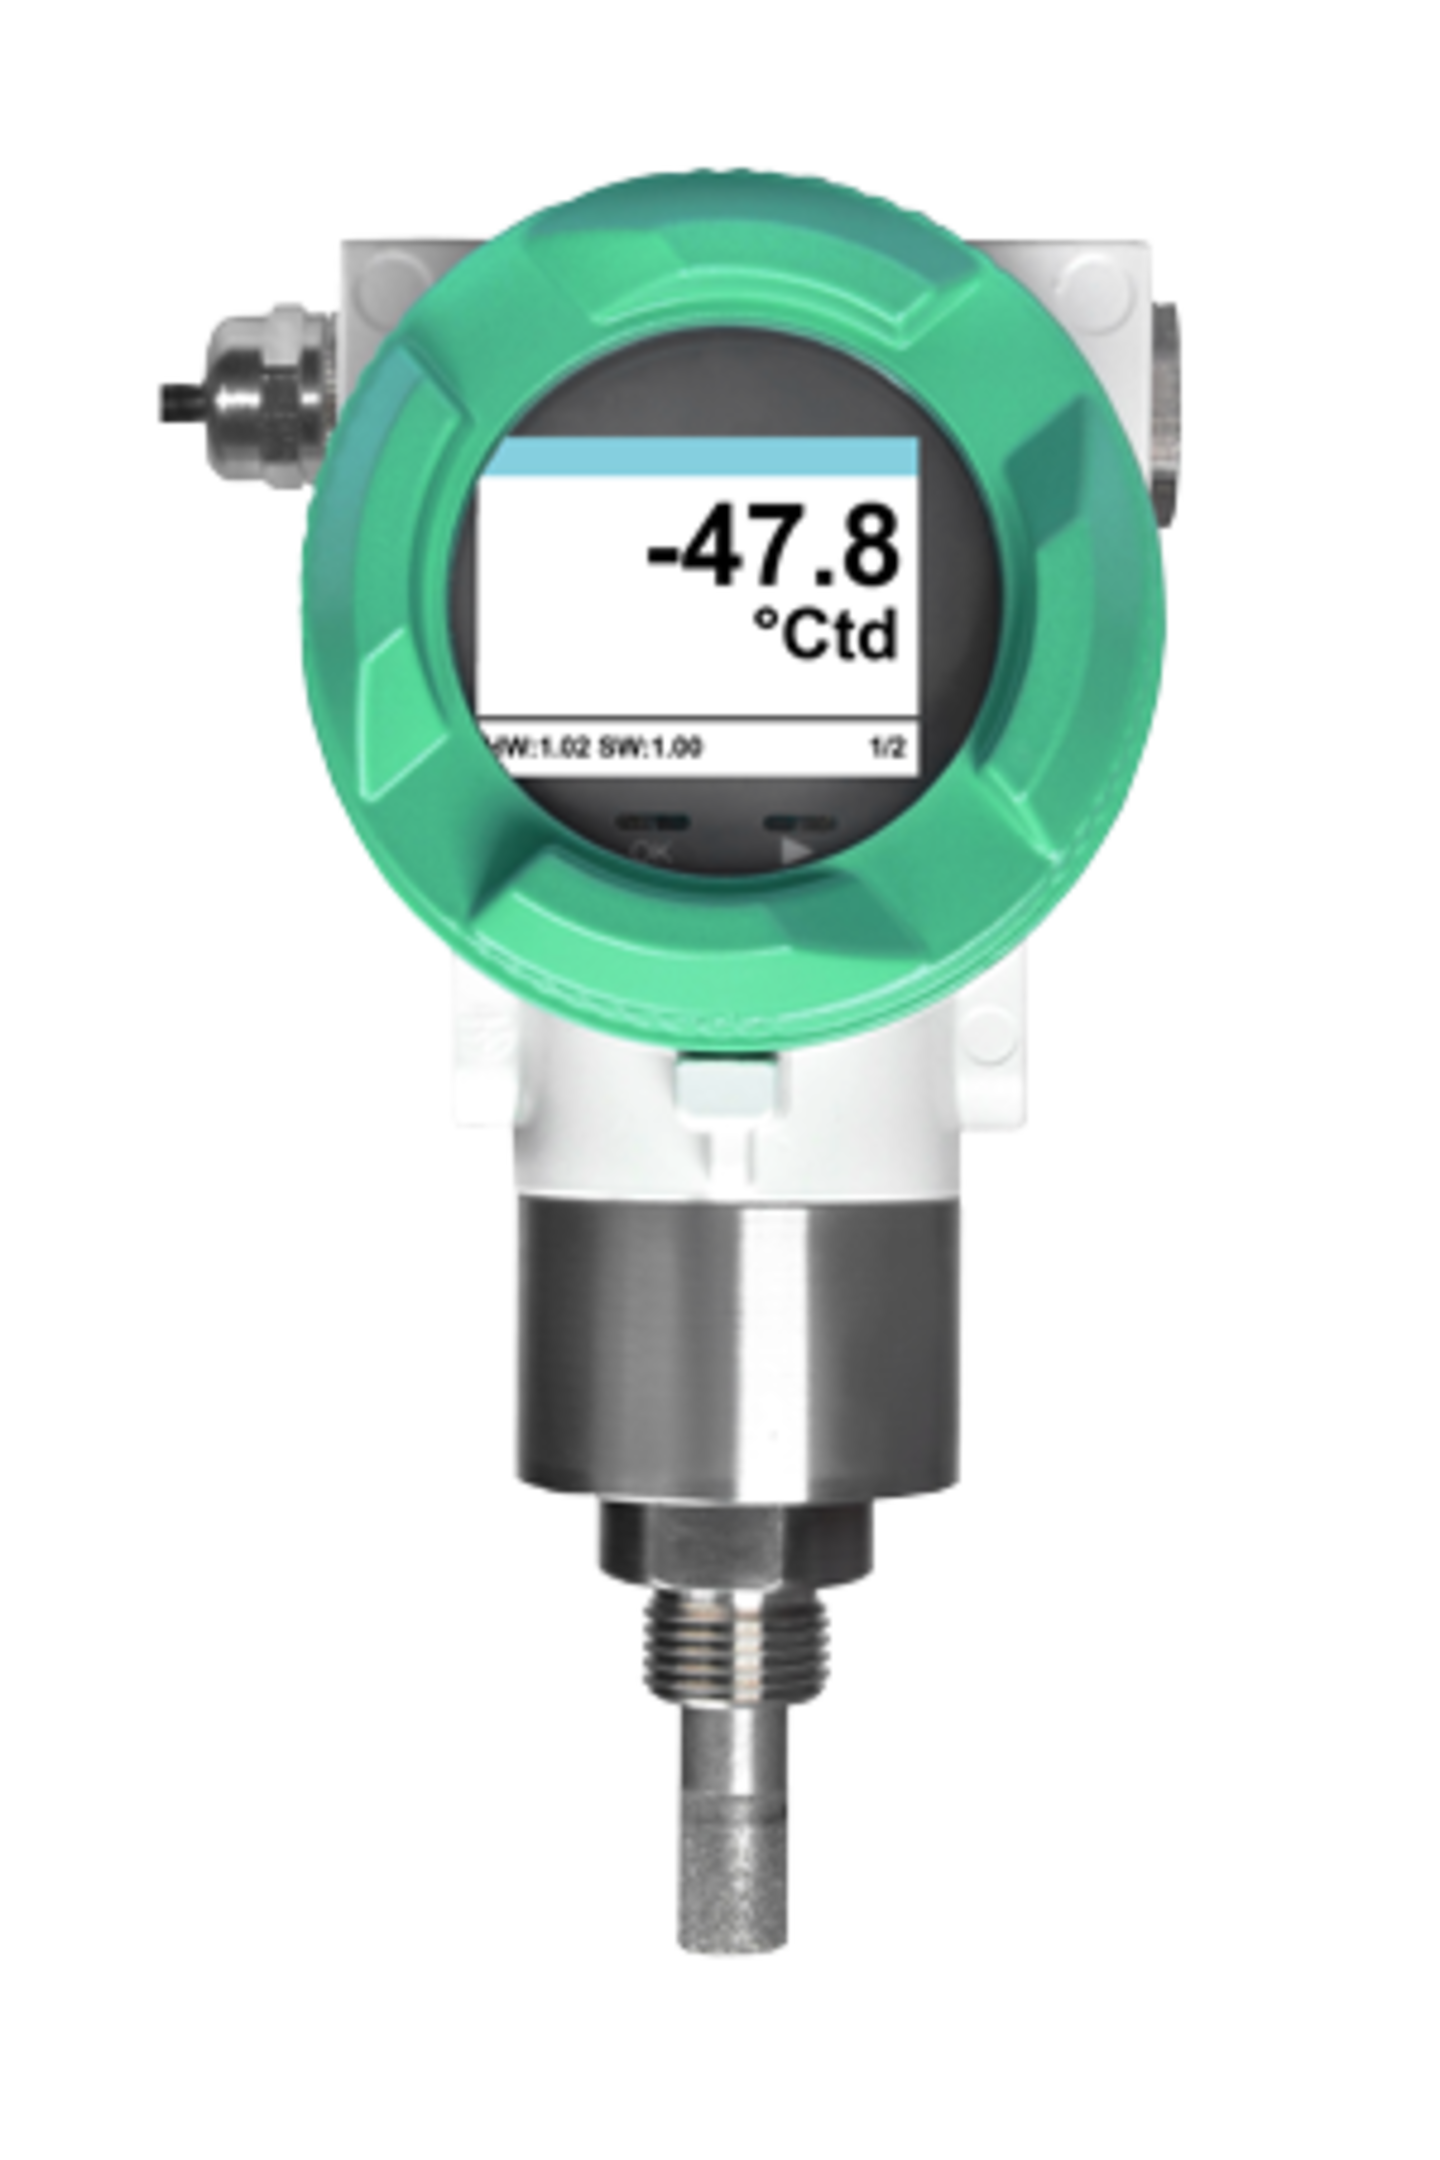 FA 550 - for dew point measurement in compressed air and gas under harsh industrial conditions